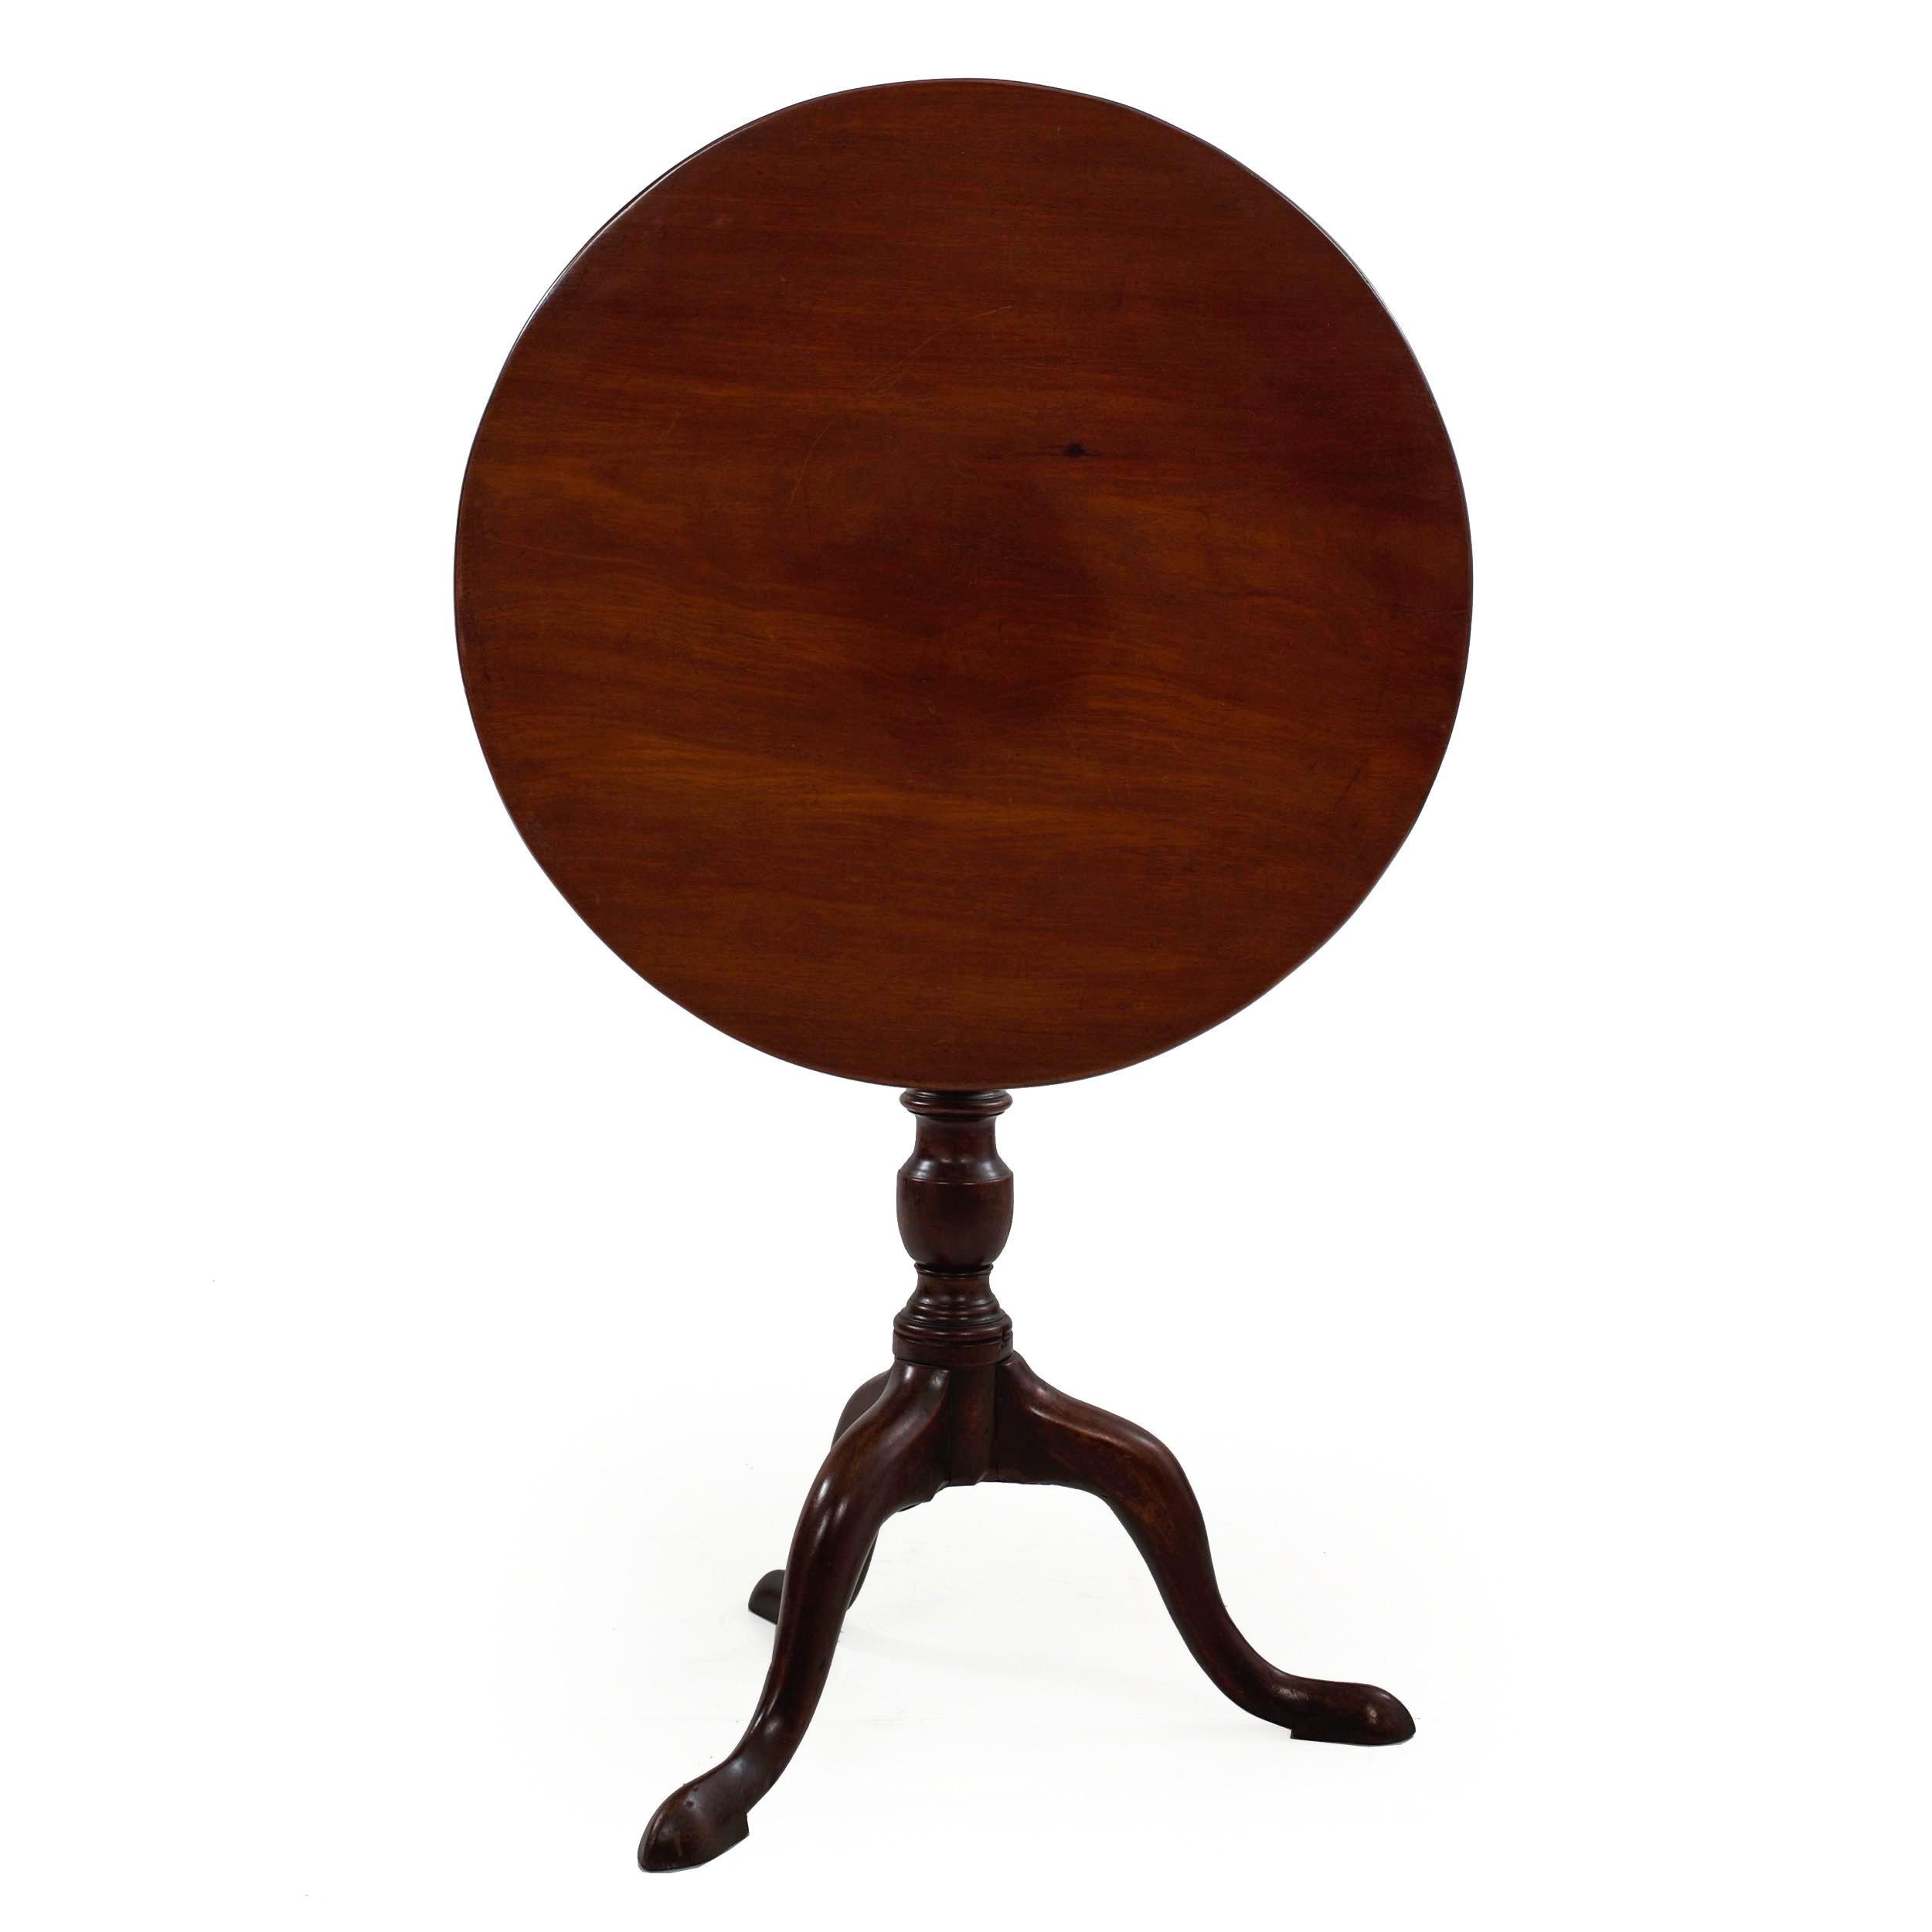 A very nice George III period mahogany tea table with a circular tilt-top over a ring-turned vasiform baluster pedestal raised on cabriole legs terminating in spade feet over integral shoes. It retains a lovely old surface throughout, the patina